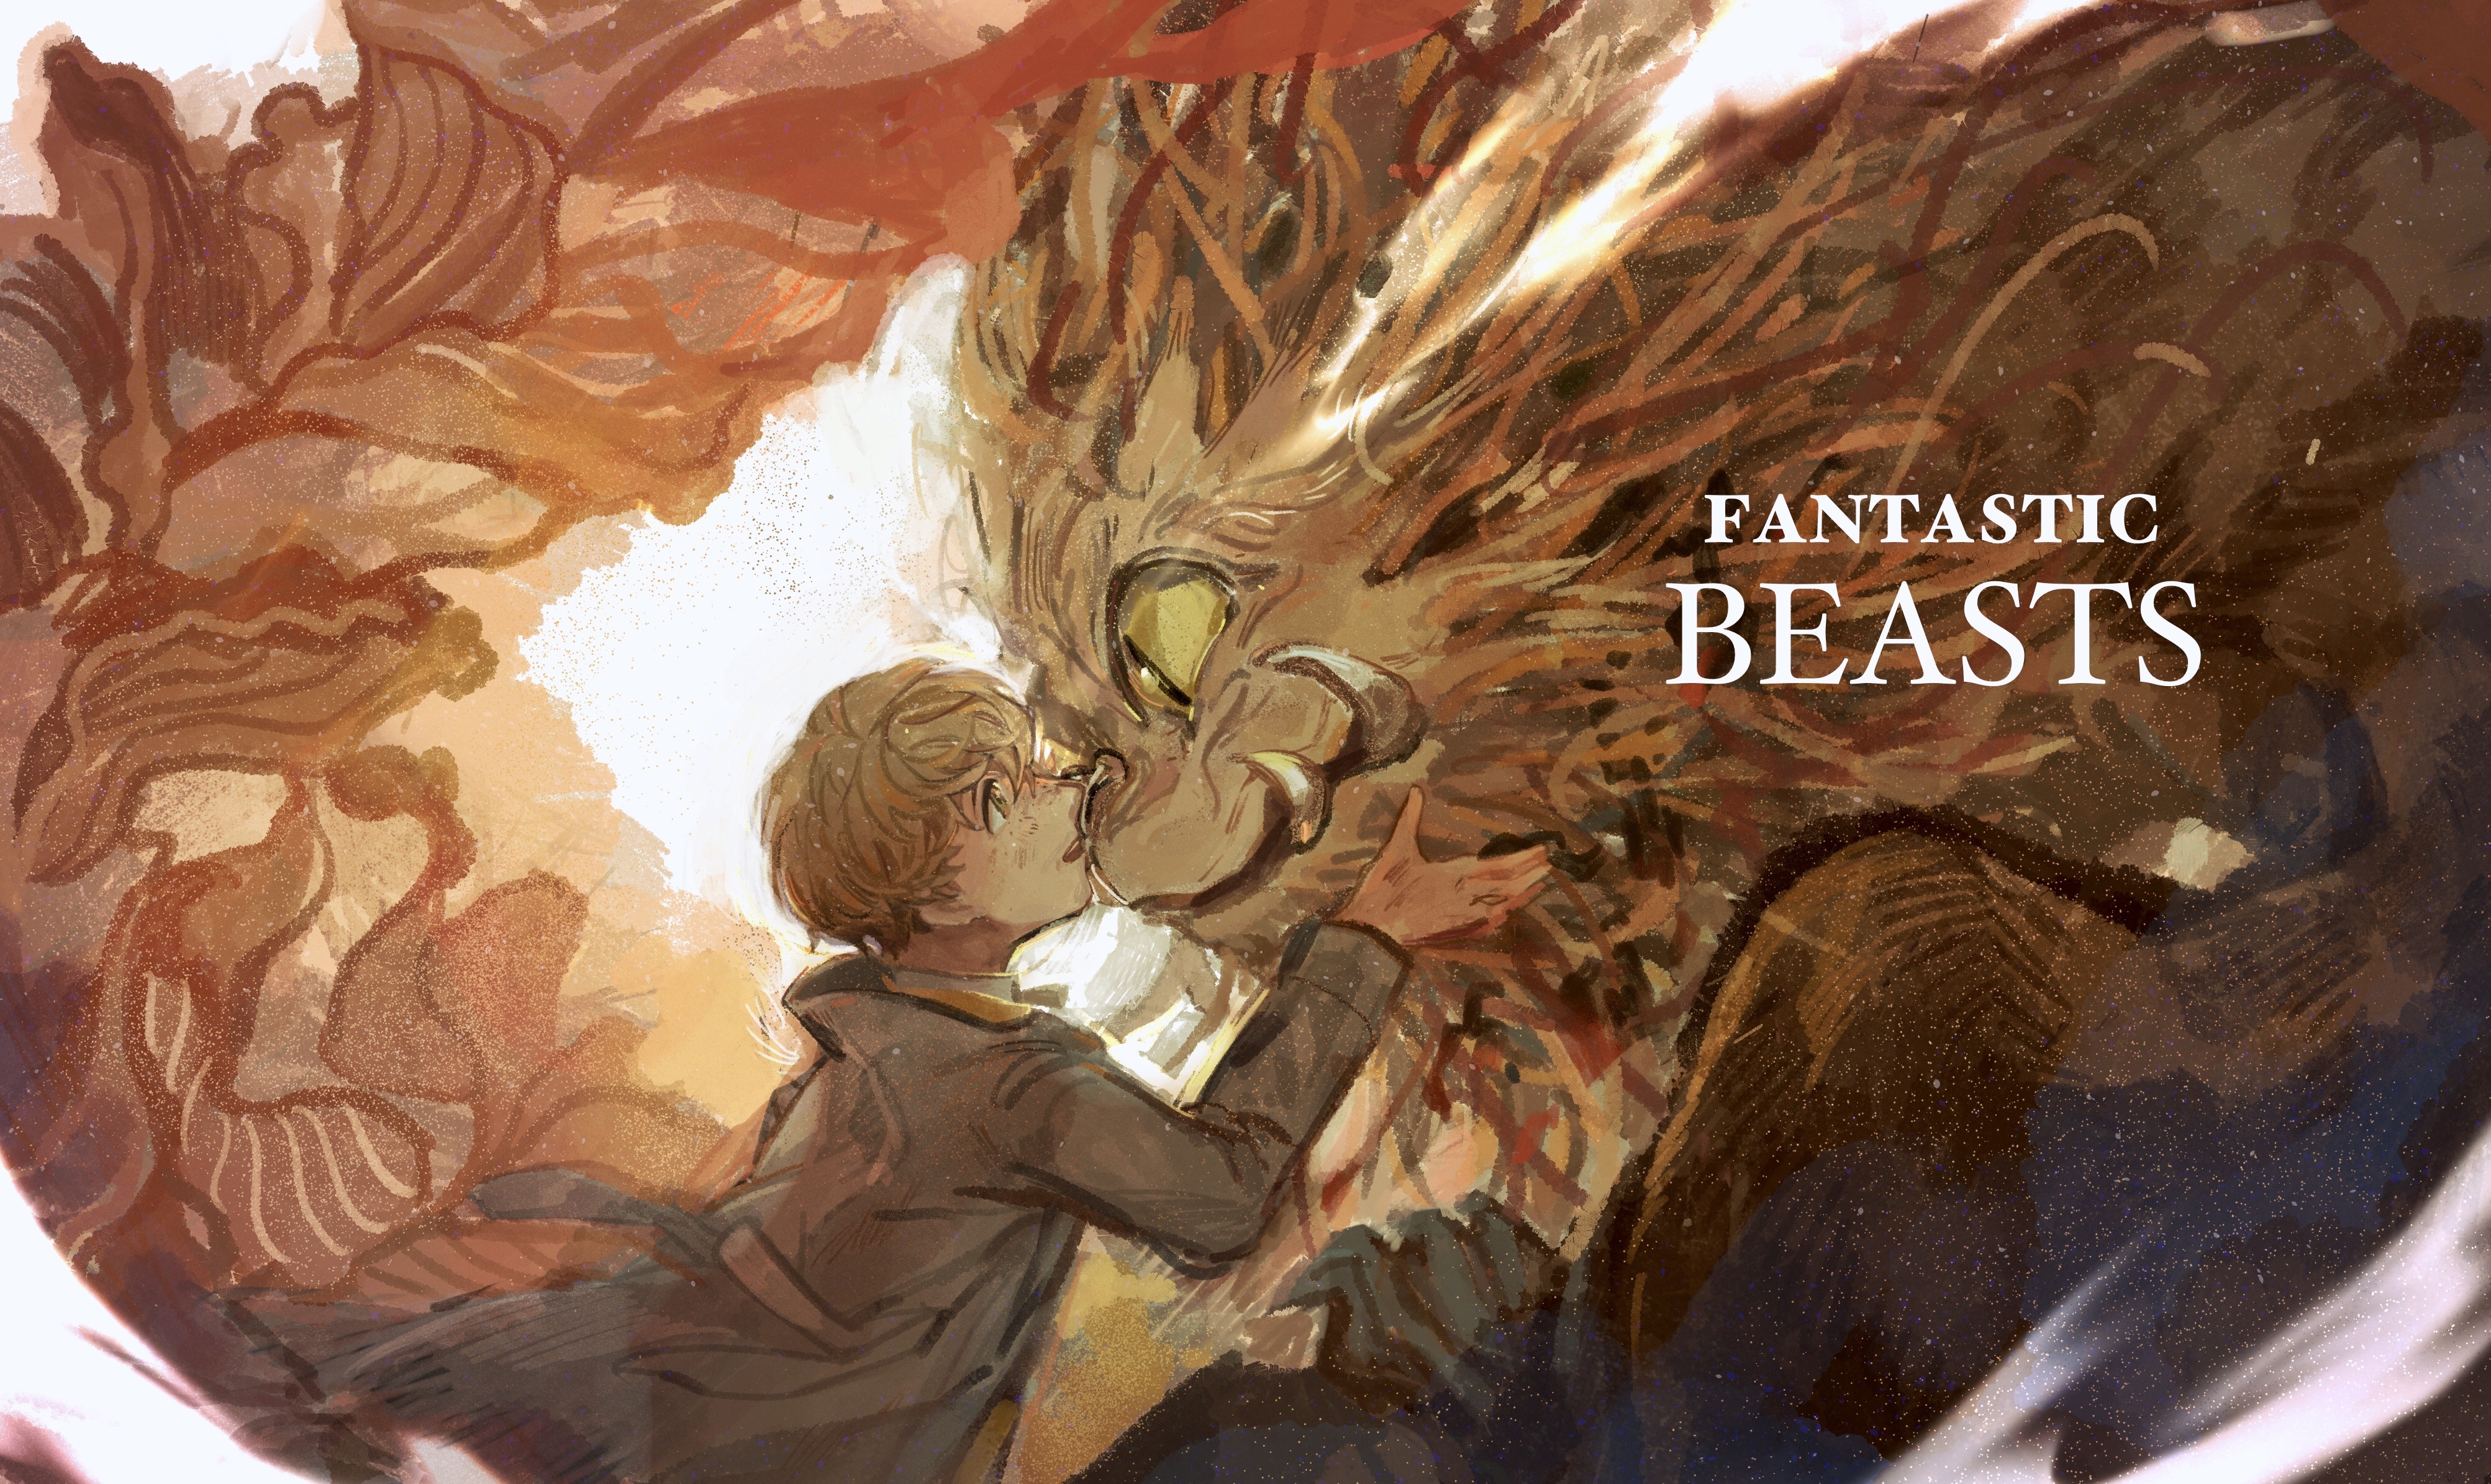 Movie Fantastic Beasts And Where To Find Them 4011x2390